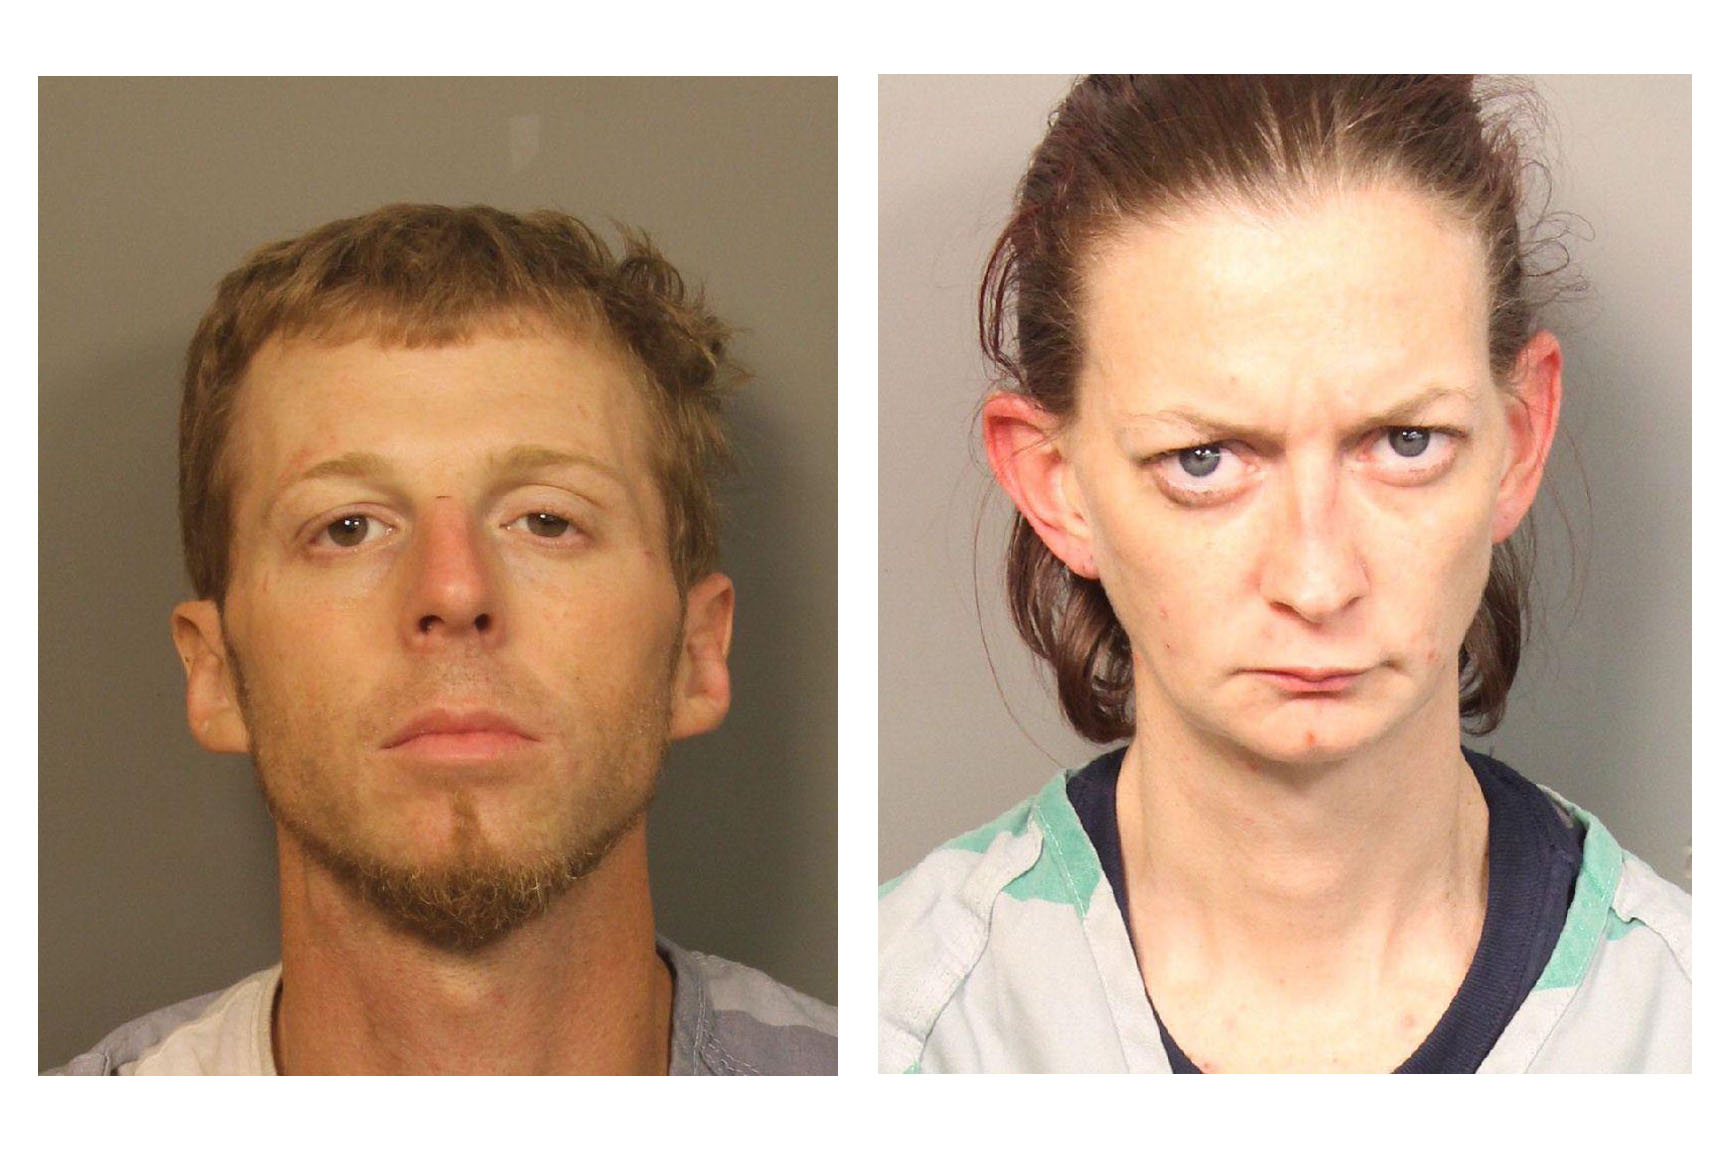 Couple arrested for attempting to smuggle drugs into Jefferson County Jail